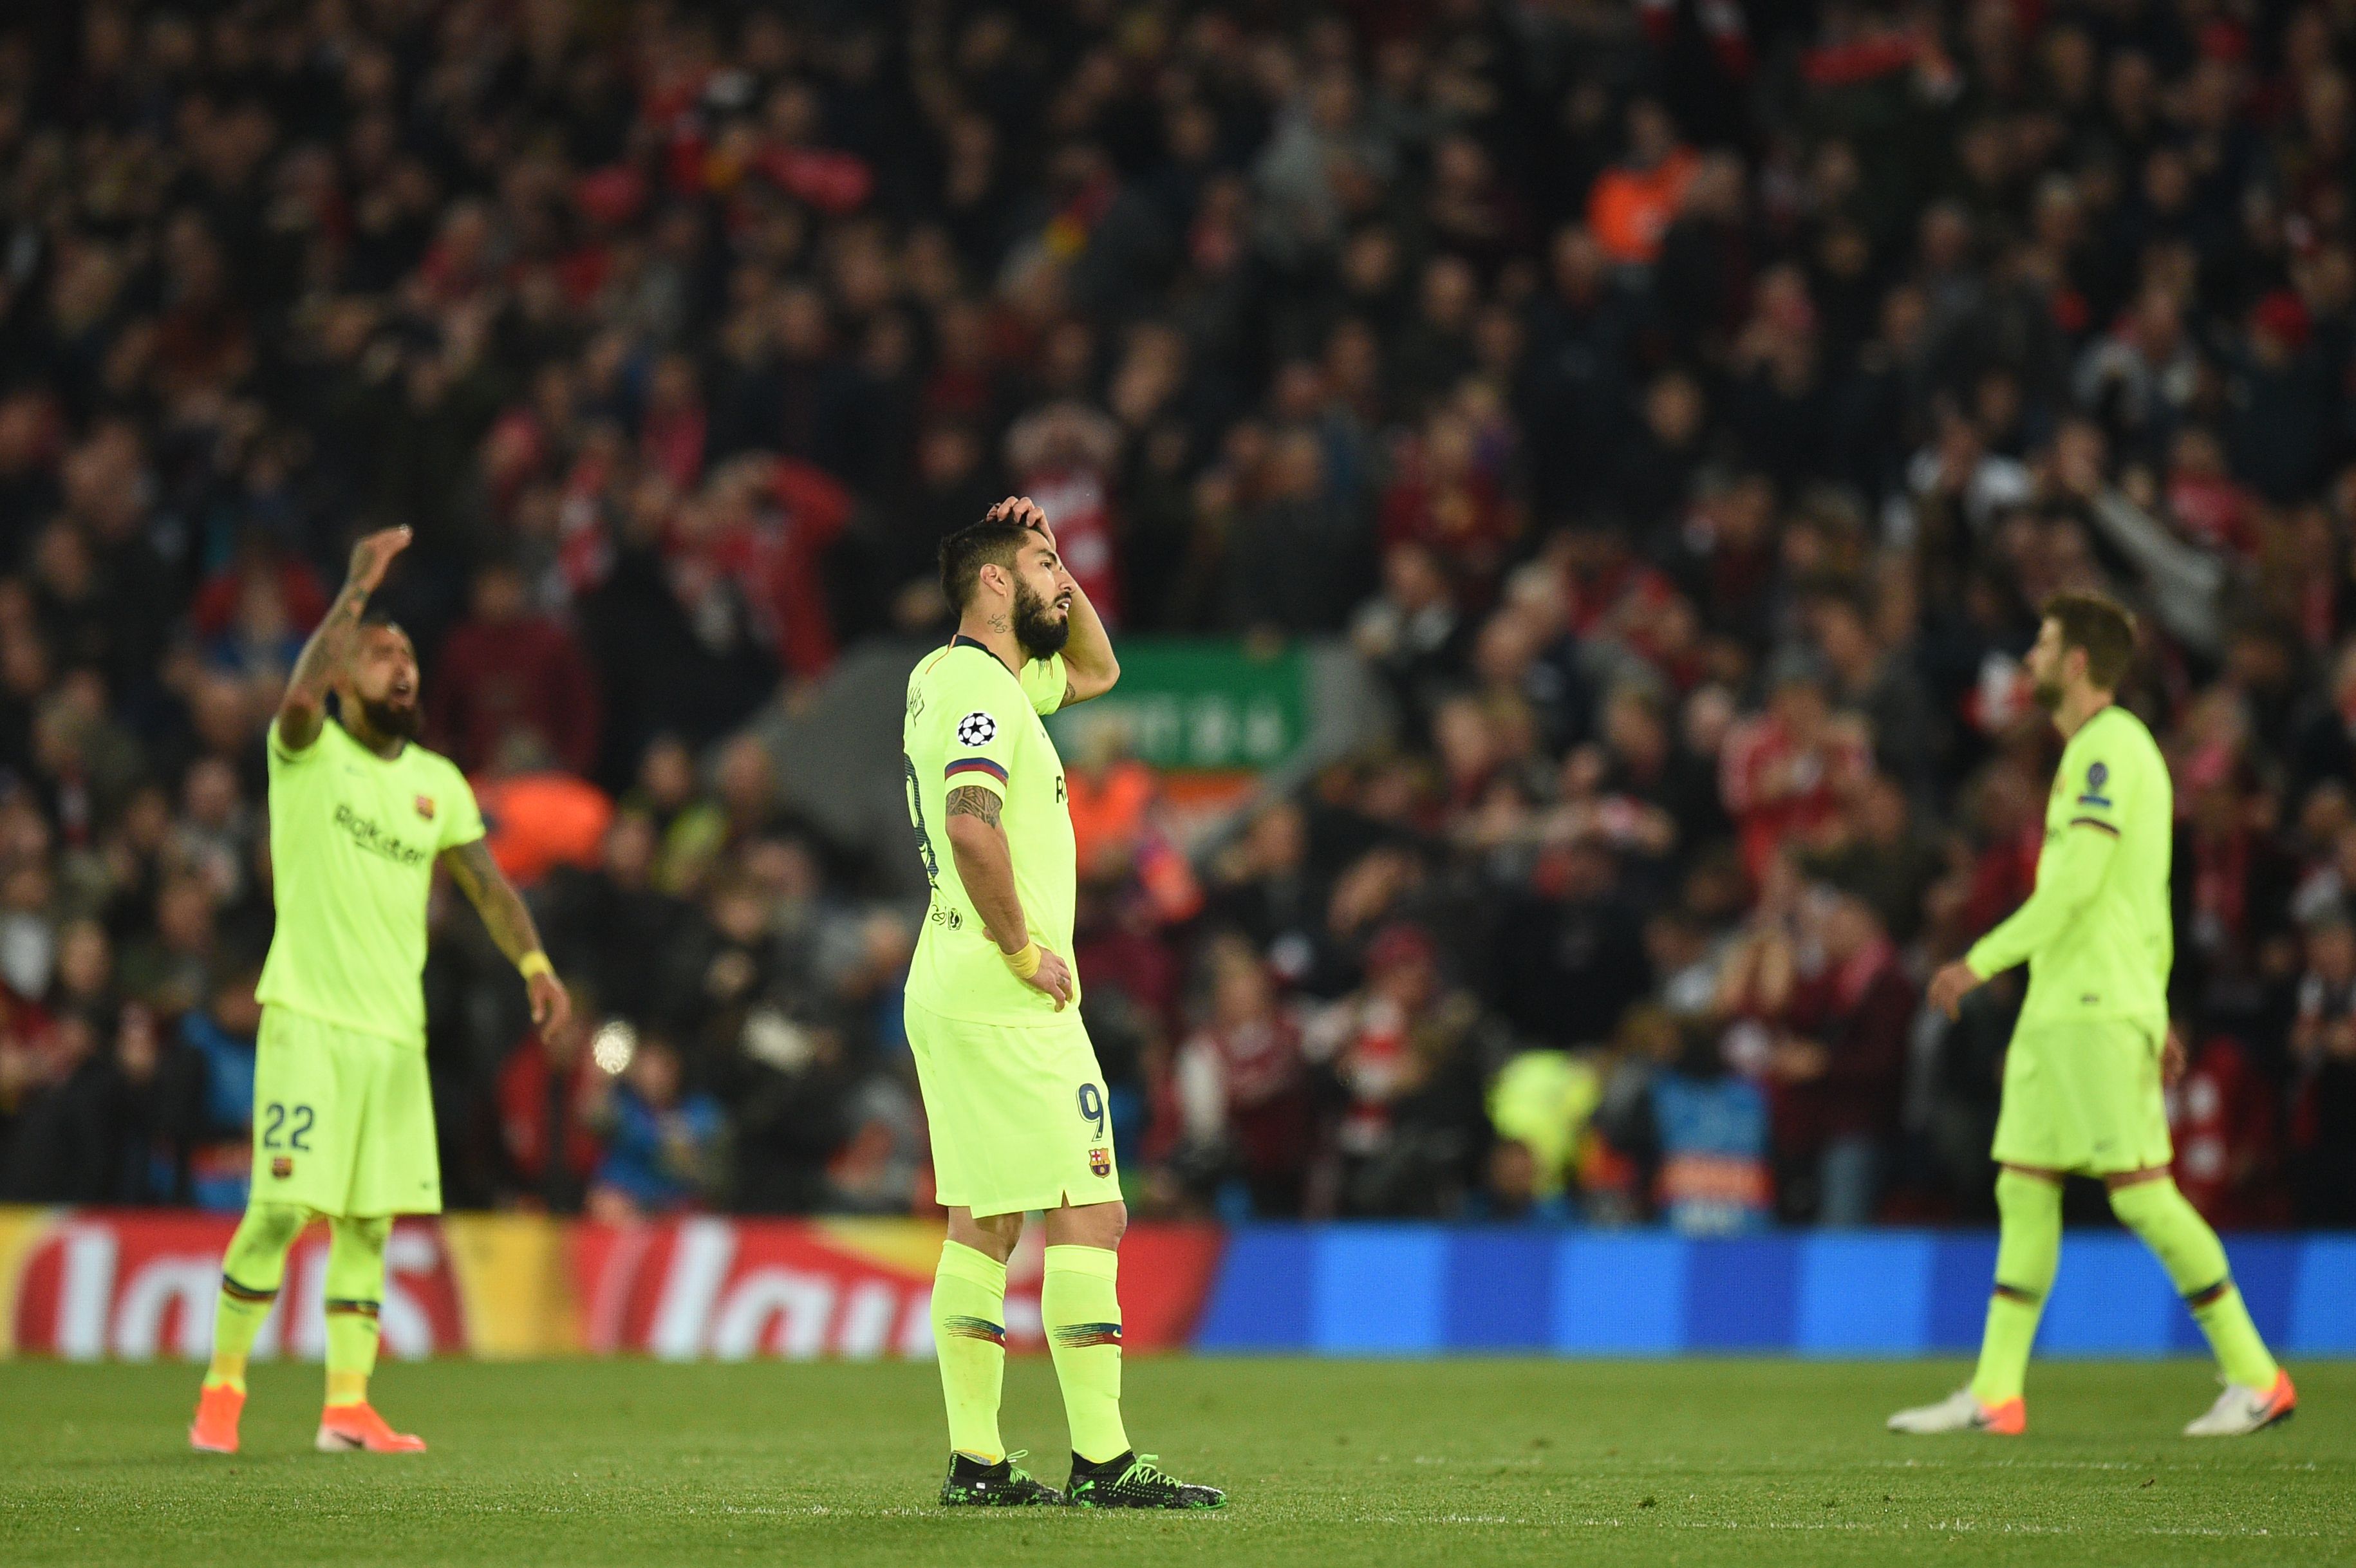 Barcelona's Uruguayan striker Luis Suarez reacts after Liverpool scored their third goal during the UEFA Champions league semi-final second leg football match between Liverpool and Barcelona at Anfield in Liverpool, north west England on May 7, 2019. (Photo by Oli SCARFF / AFP)        (Photo credit should read OLI SCARFF/AFP/Getty Images)